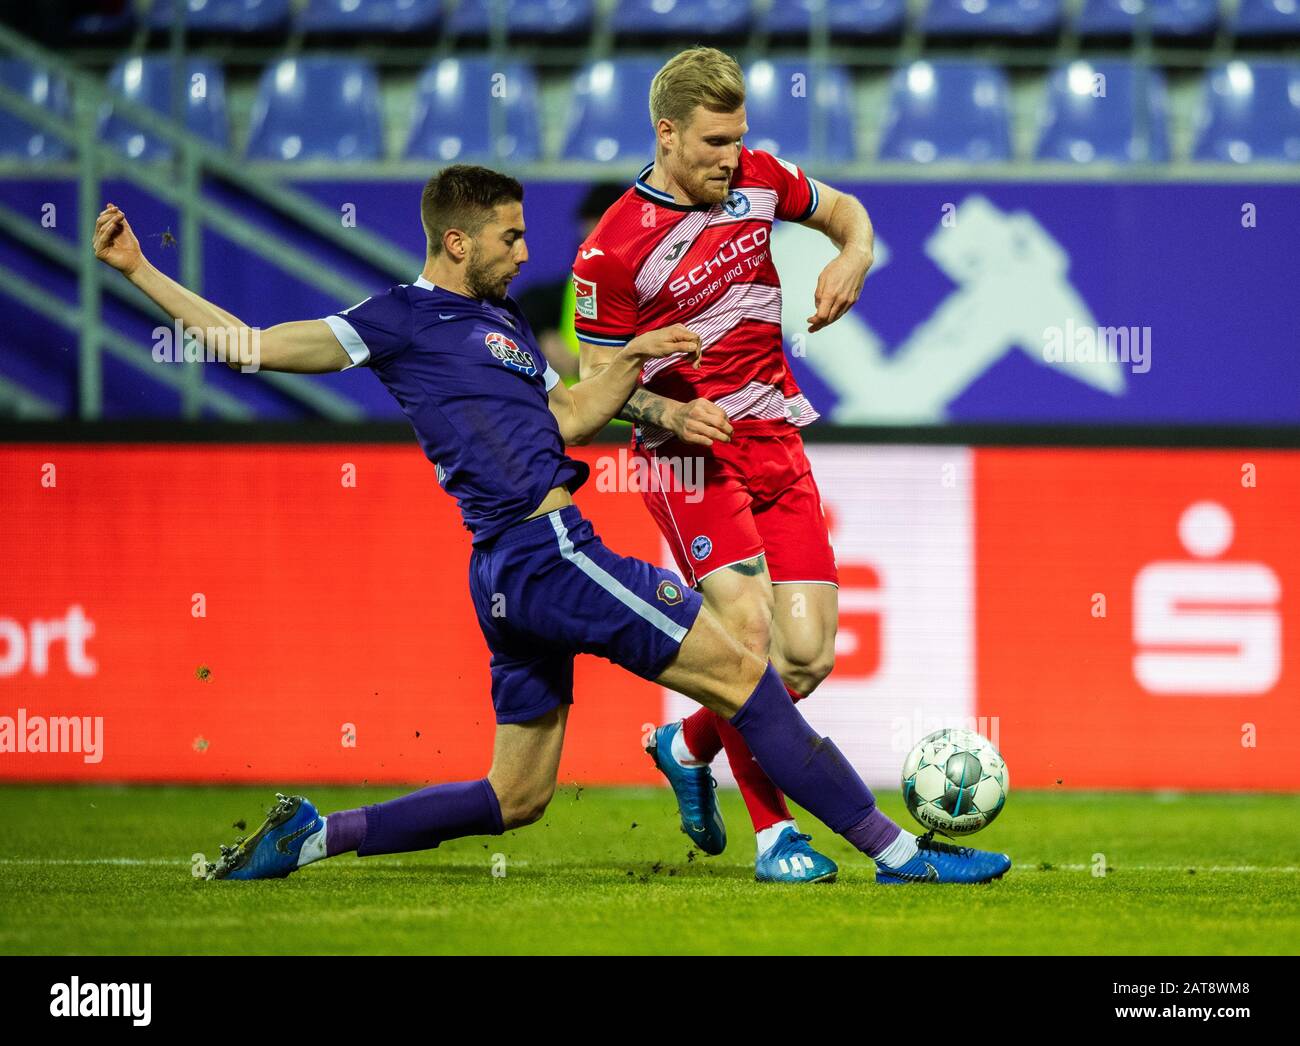 Aue, Germany. 31st Jan, 2020. Football: 2nd Bundesliga, FC Erzgebirge Aue - Arminia Bielefeld, 20th matchday, at the Sparkassen-Erzgebirgsstadion. Aues Marko Mihojevic (l) against Bielefeld's Andreas Voglsammer. Credit: Robert Michael/dpa - IMPORTANT NOTE: In accordance with the regulations of the DFL Deutsche Fußball Liga and the DFB Deutscher Fußball-Bund, it is prohibited to exploit or have exploited in the stadium and/or from the game taken photographs in the form of sequence images and/or video-like photo series./dpa/Alamy Live News Stock Photo